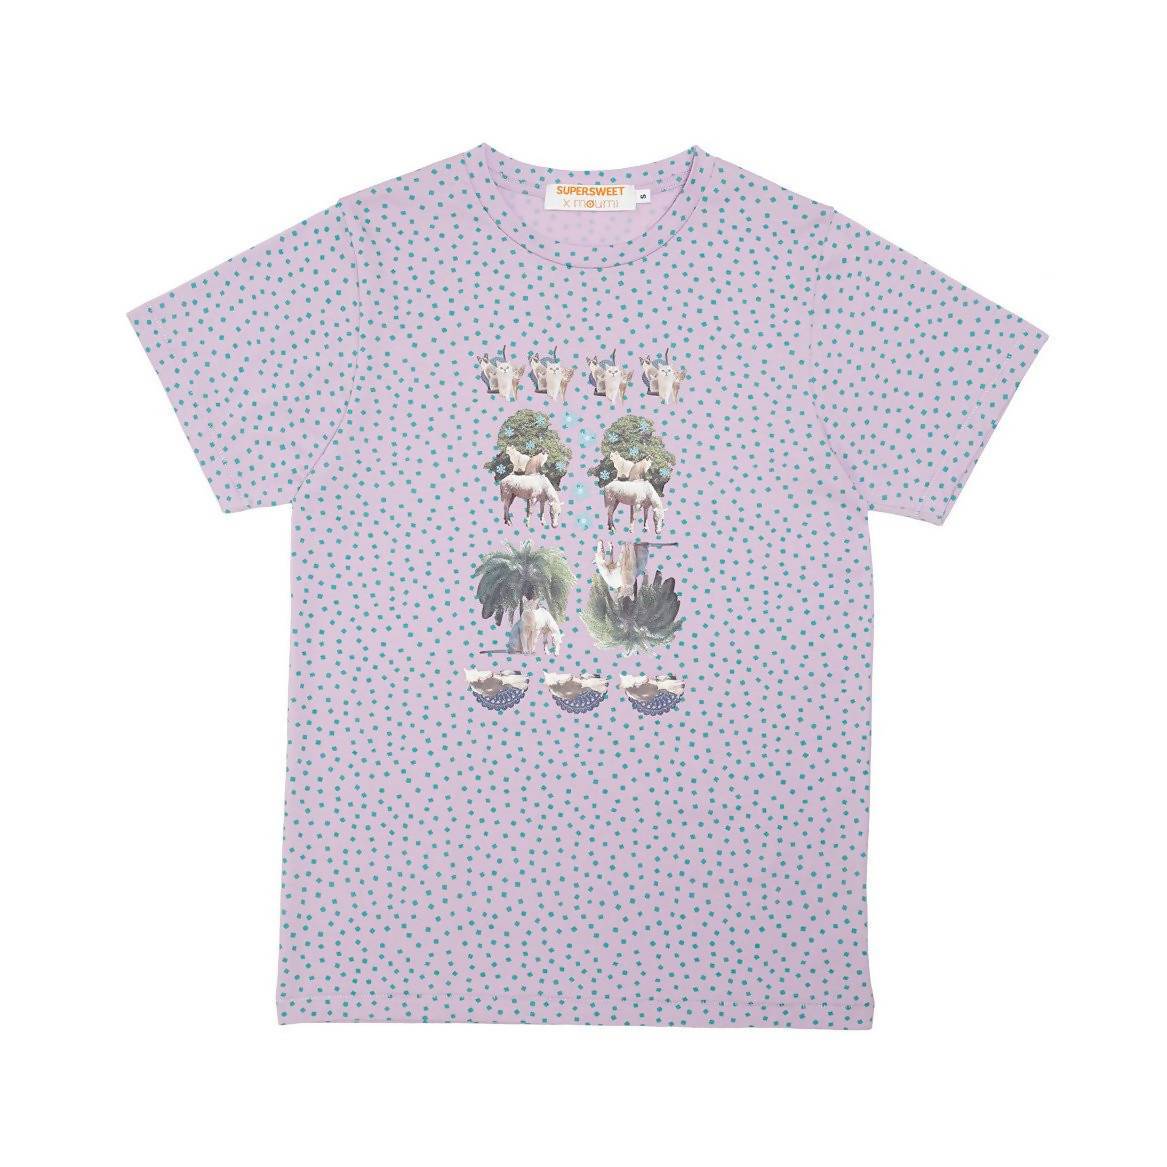 Moumi & Friends Green Dotted Tee - T-shirts - By Moumi - Naiise